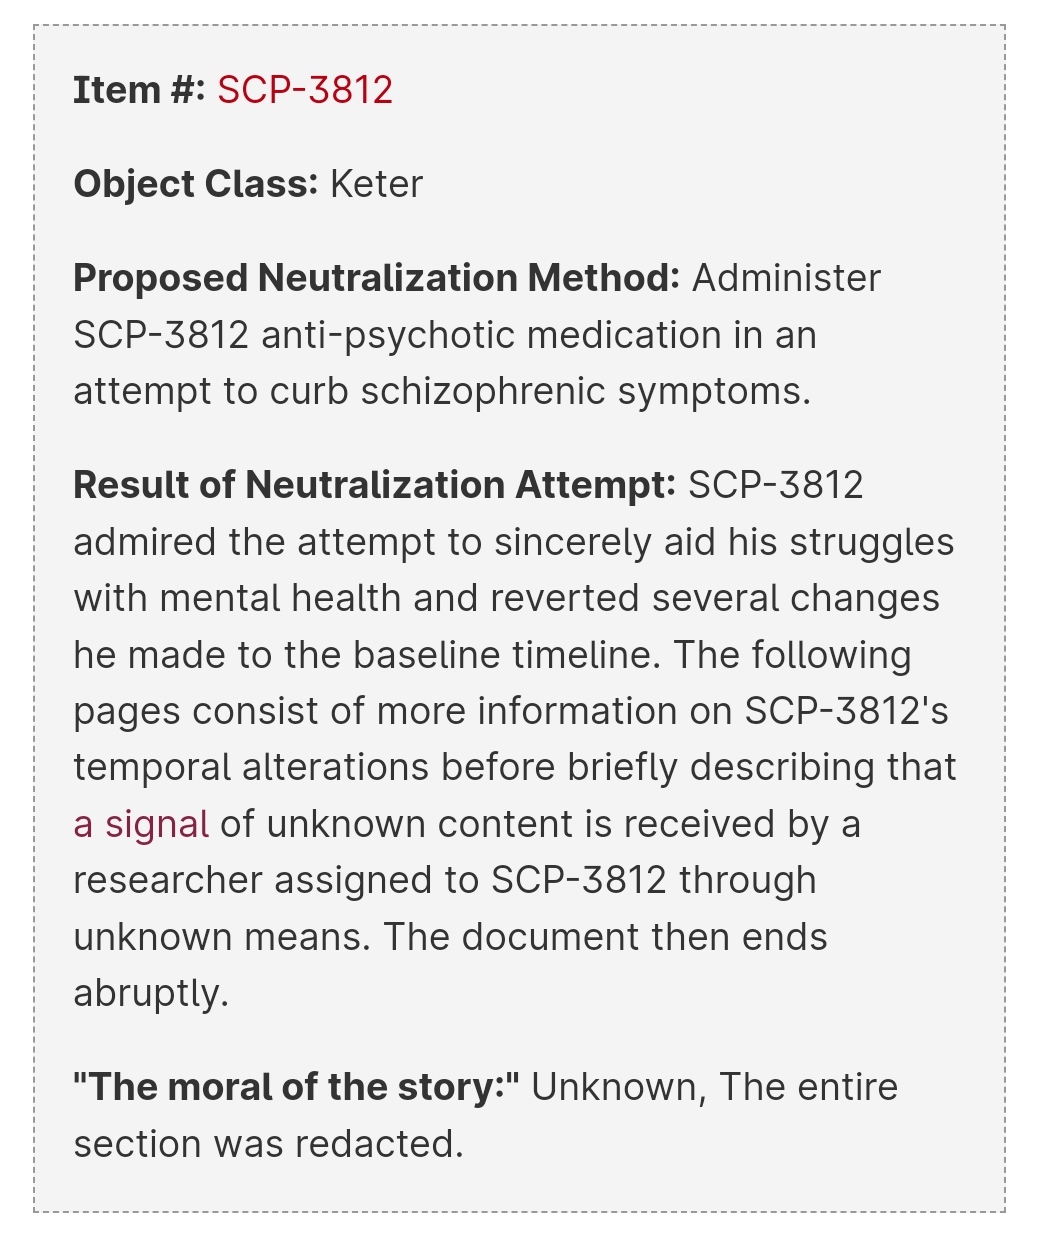 SCP Classes (The known and unknown) PART 1 